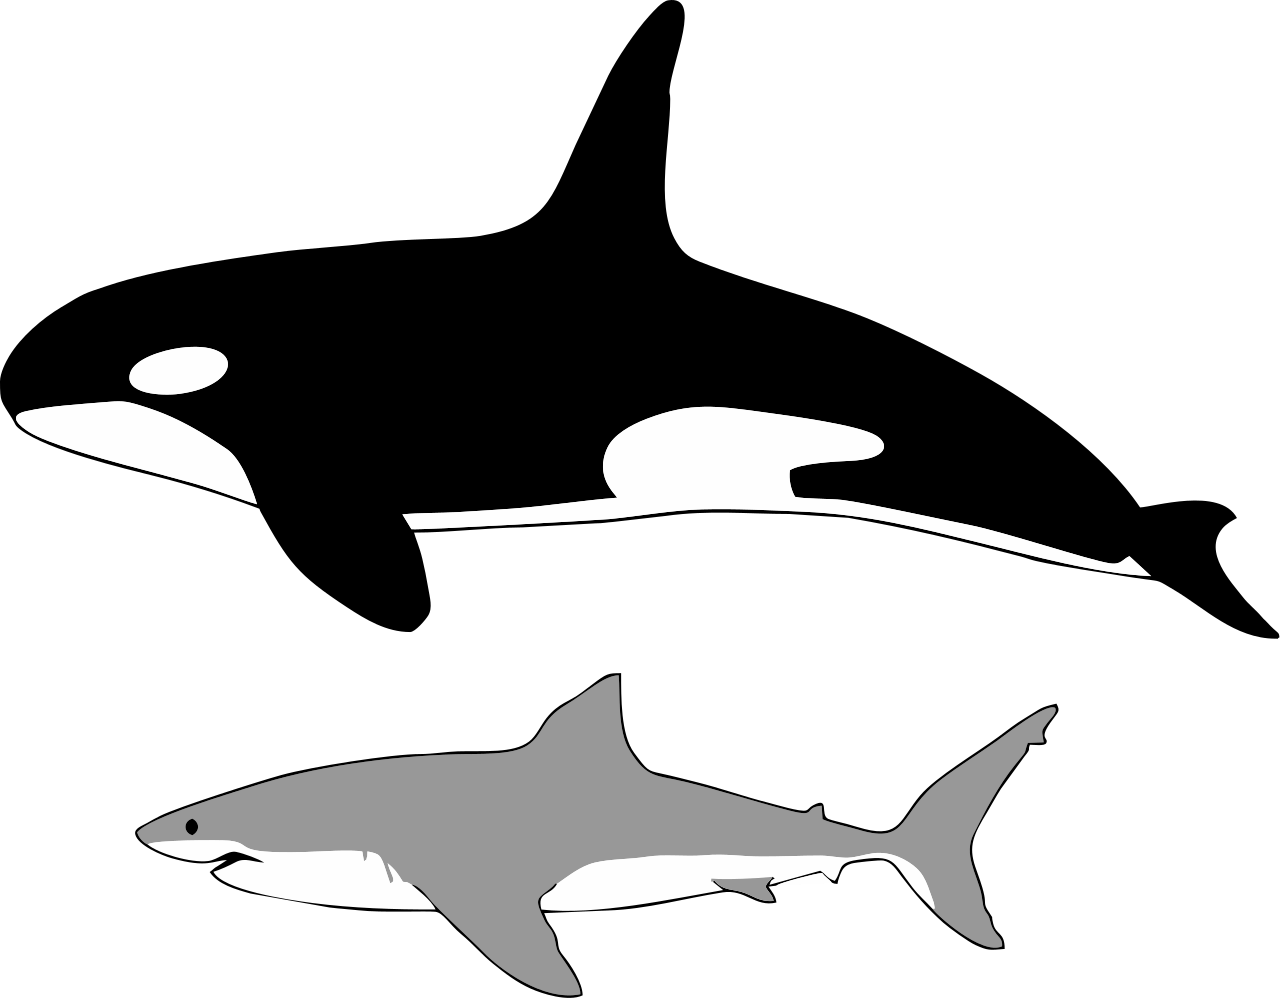 1280px-Comparison_of_size_of_orca_and_great_white_shark.svg.png